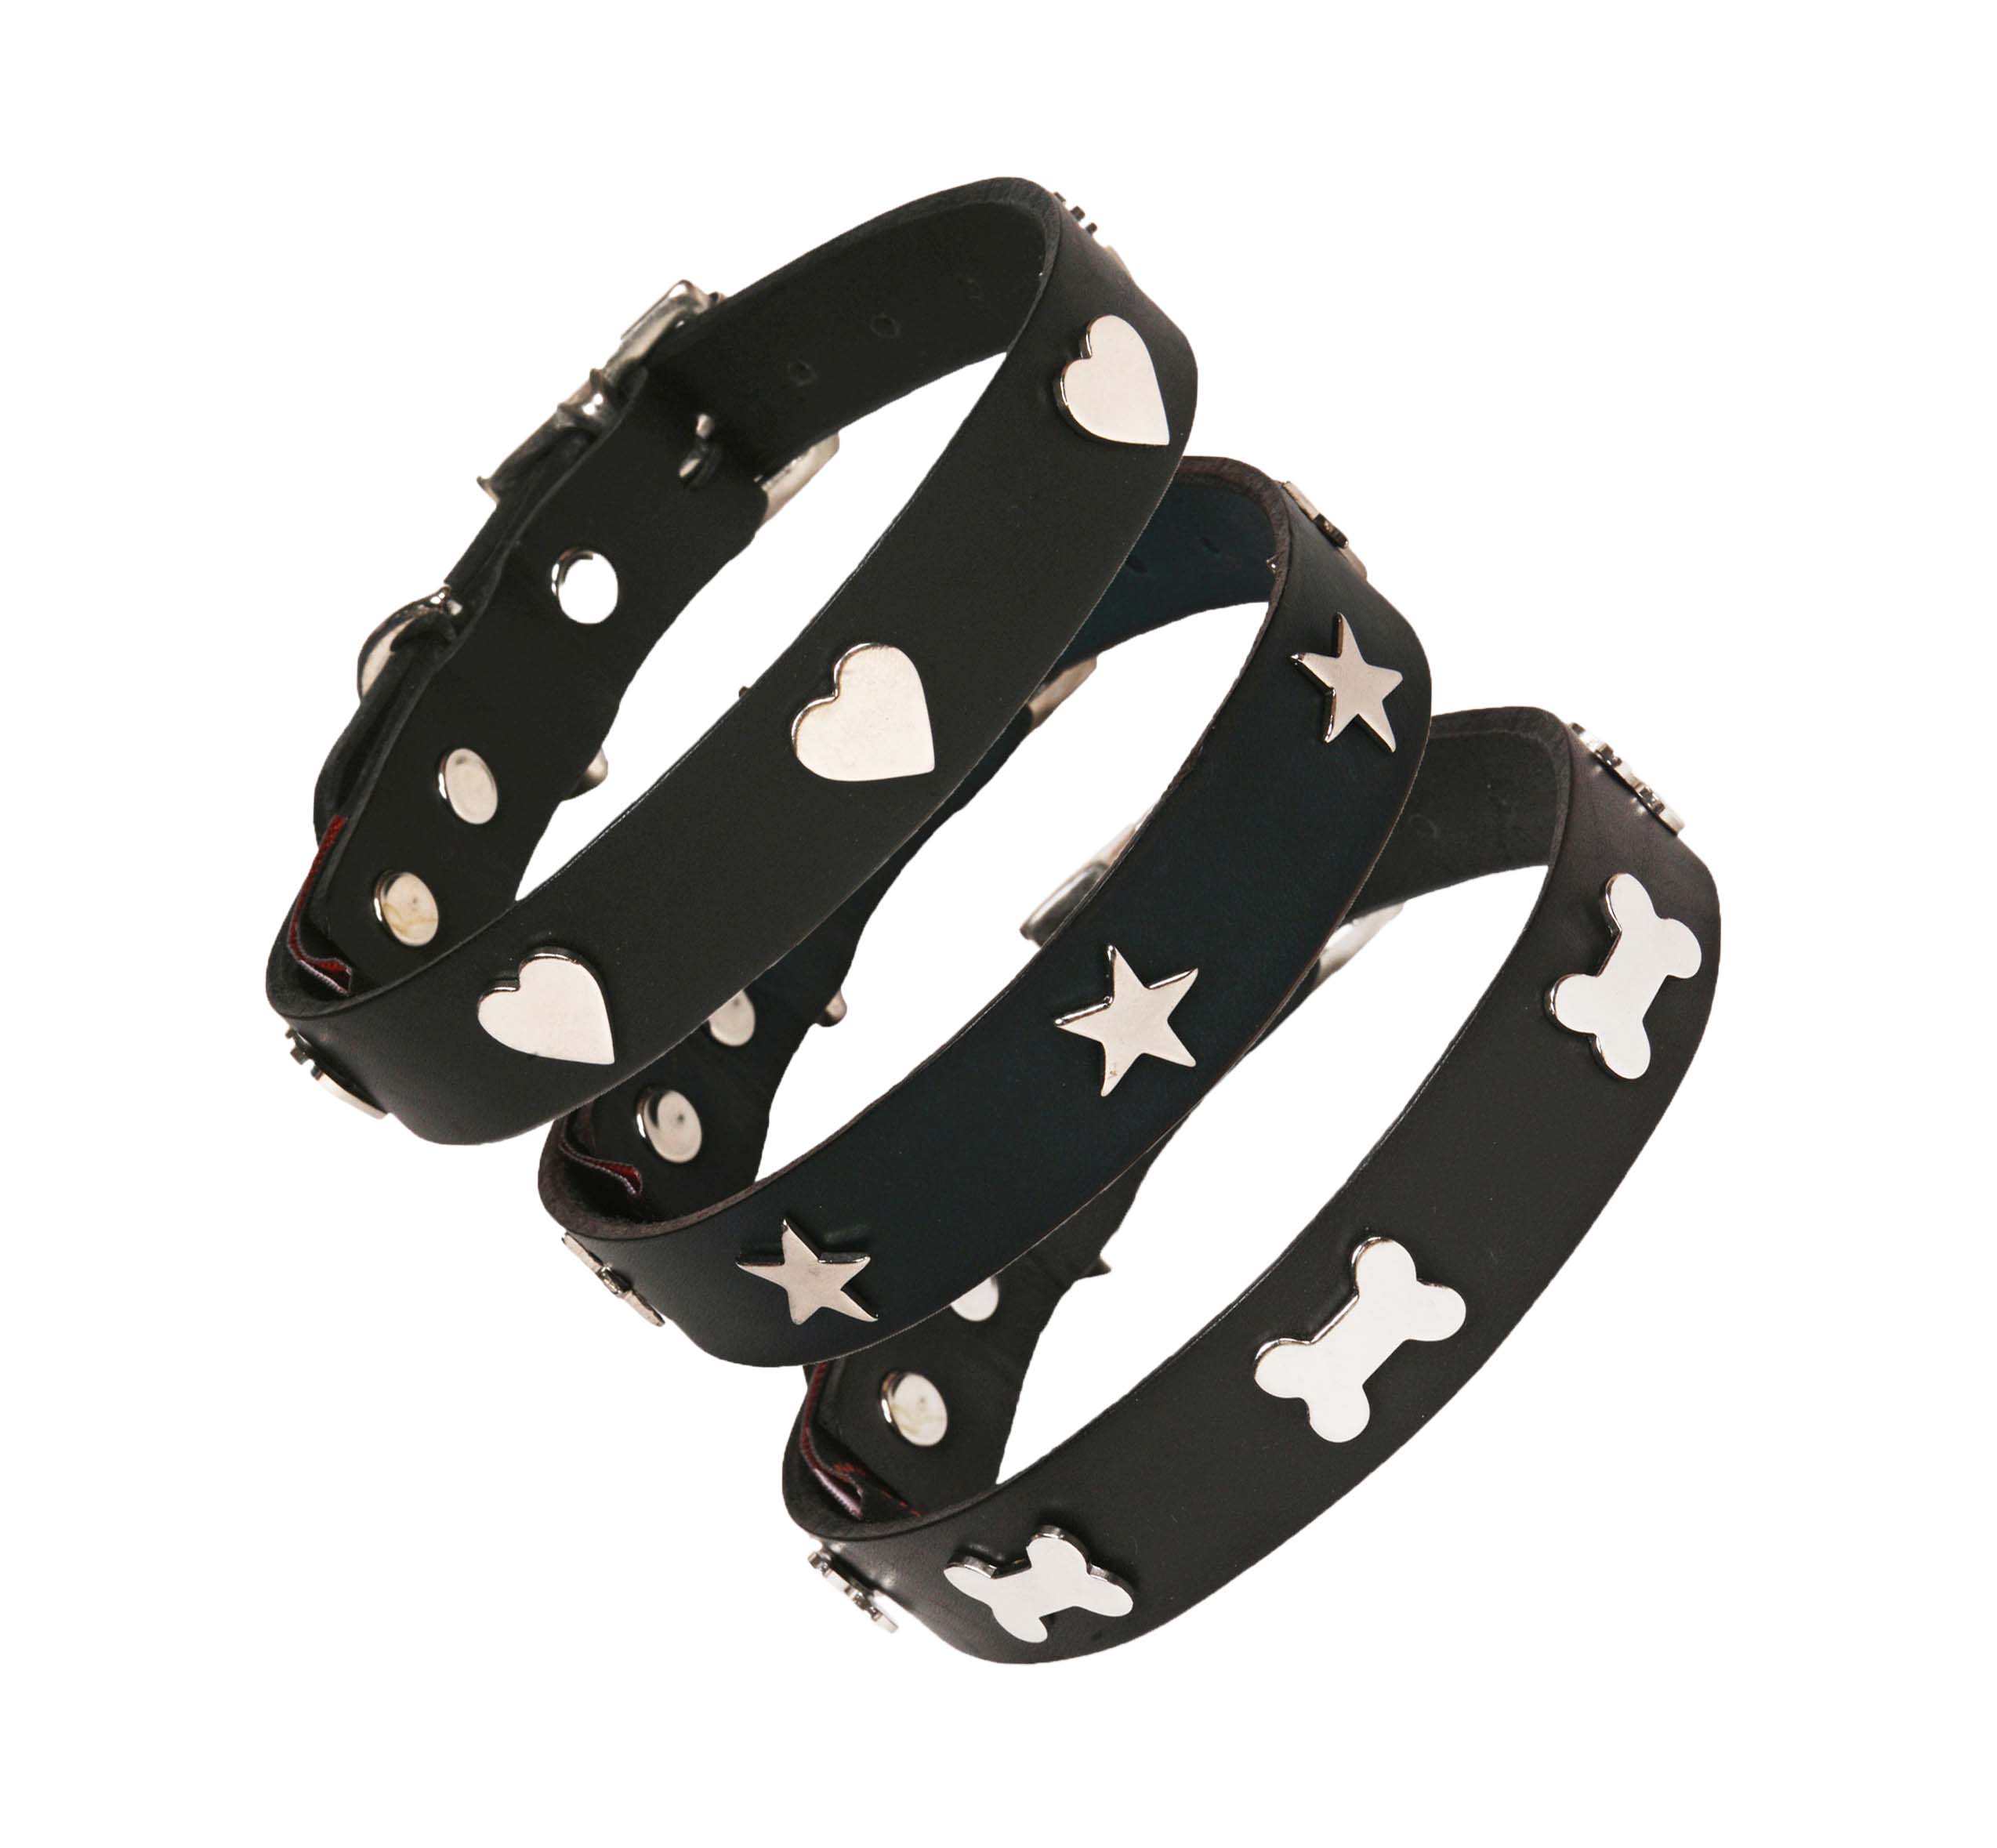 Creature Clothes Black Leather Dog Collar With Silver Studs